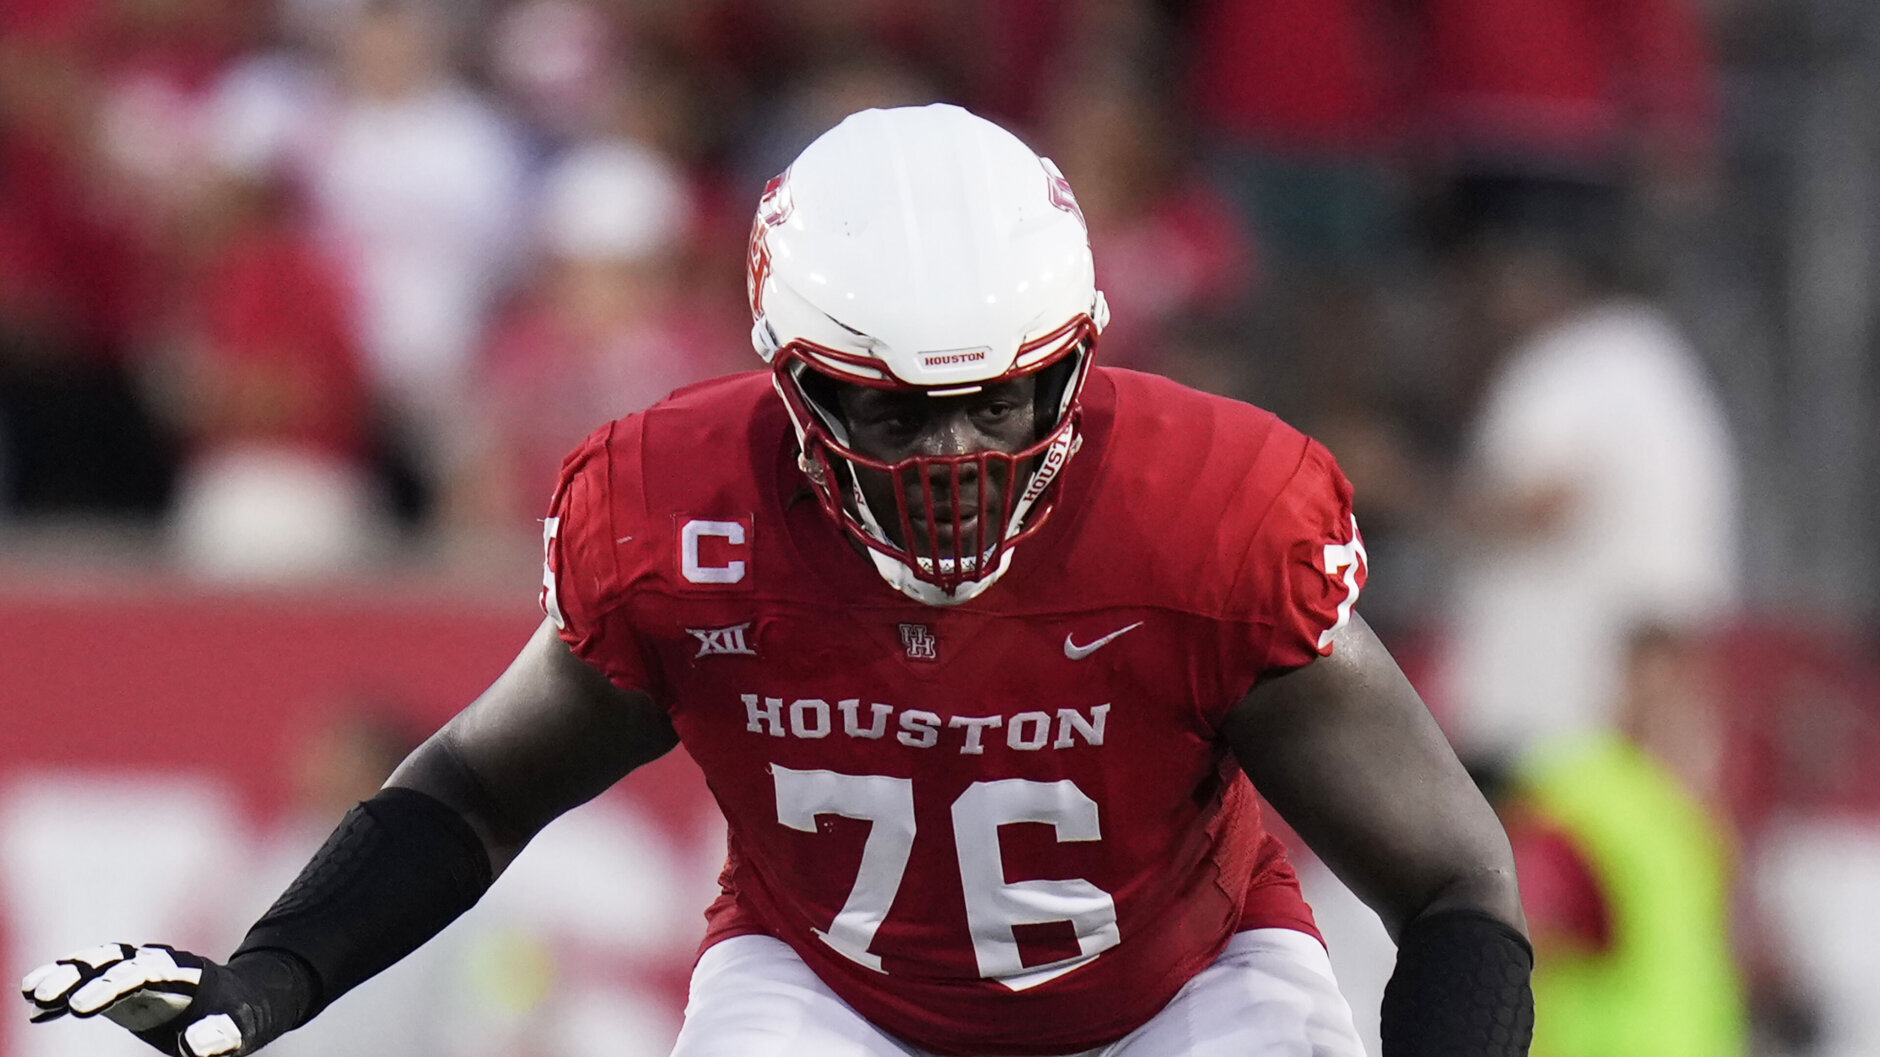 <h3>Round 2 (36th overall) — Patrick Paul, OT Houston</h3>
<p>Let me be clear: I&#8217;d prefer Washington trades this pick as part of a package to select Chop Robinson in the first round. Yeah, I know a certain 2020 first-round edge rusher from Penn State with local ties didn&#8217;t pan out … but if the Quince Orchard High School graduate is the second coming of Micah Parsons, the Commanders can ill afford to see him go elsewhere, let alone to another division rival.</p>
<p>But, in the spirit of sticking to the picks, I&#8217;ll go with the younger (and projectedly better) of the Paul brothers (the Commanders already have Chris, the guard selected in the seventh round in 2020). Patrick played in an Air Raid-style offense so his transition to Kliff Kingsbury&#8217;s version should be relatively smooth. Plus, he&#8217;s a natural left tackle, while contemporaries Amarius Mims and Tyler Guyton primarily played the right side in college (and, frankly, may be gone by the time this pick is on the clock). There may or may not be a better tackle option here but it&#8217;s arguably Washington&#8217;s second-most pressing need entering this draft.</p>
